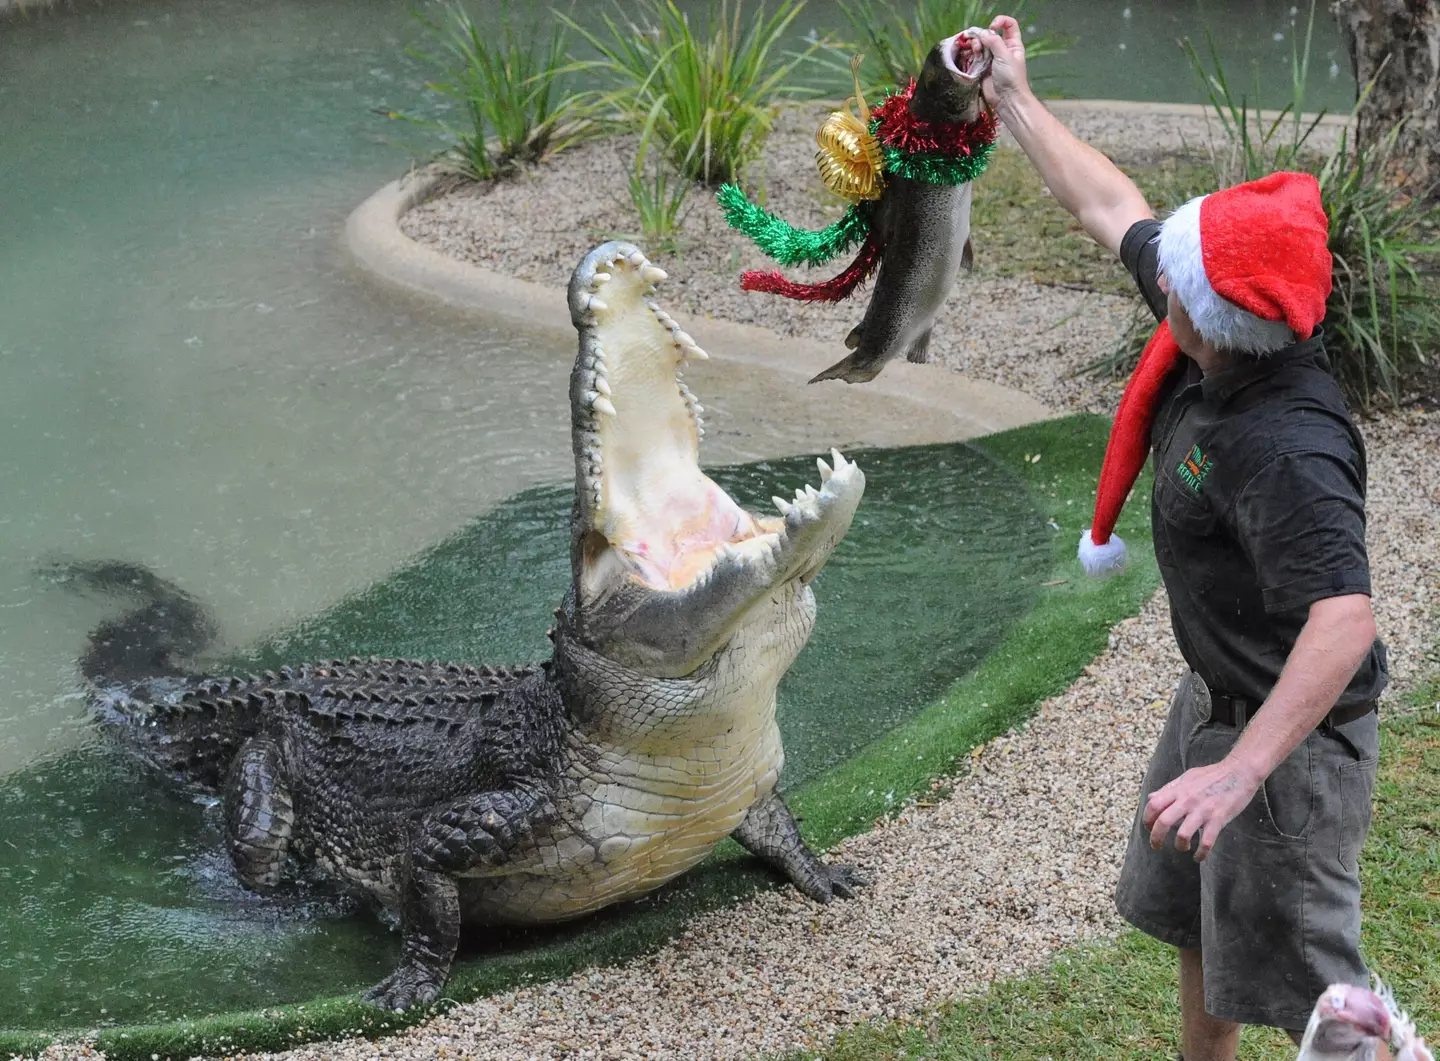 Elvis is fed a salmon for Christmas.